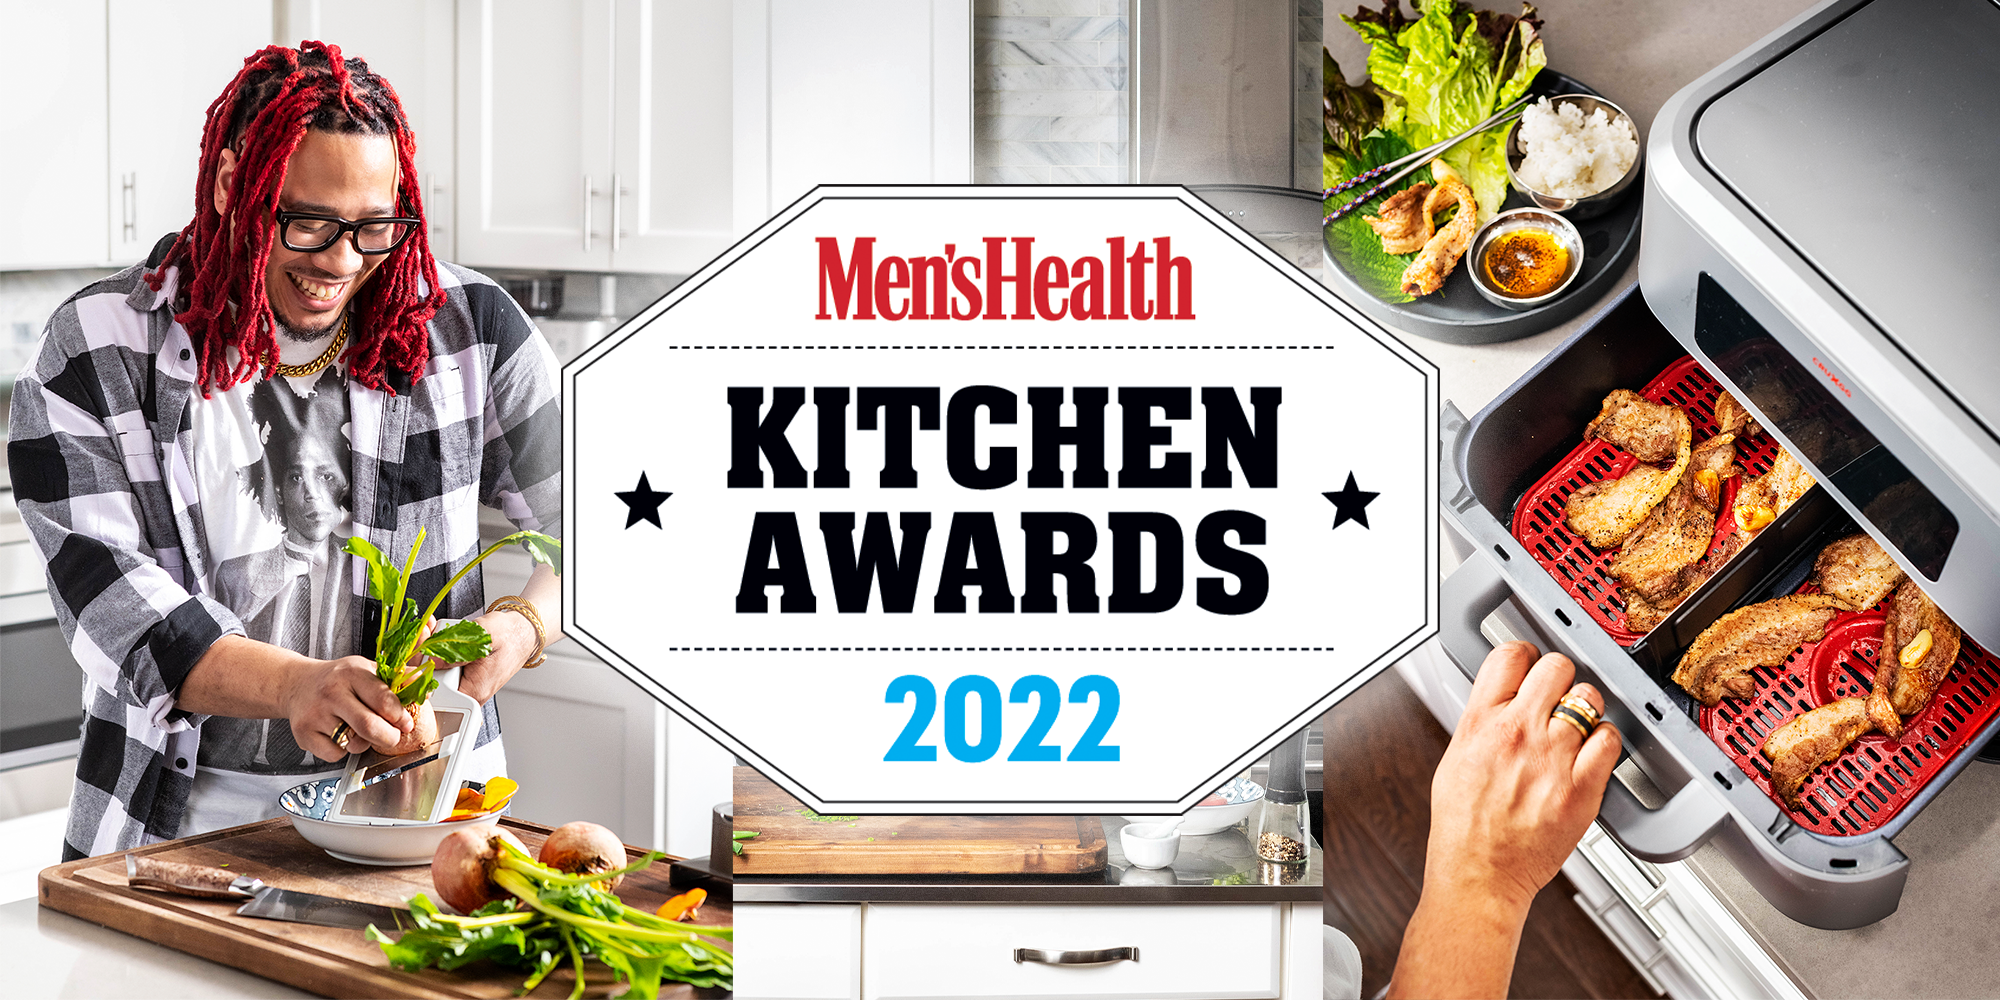 Reviewed's 2022 Best of Year: Kitchen & Cooking - Reviewed